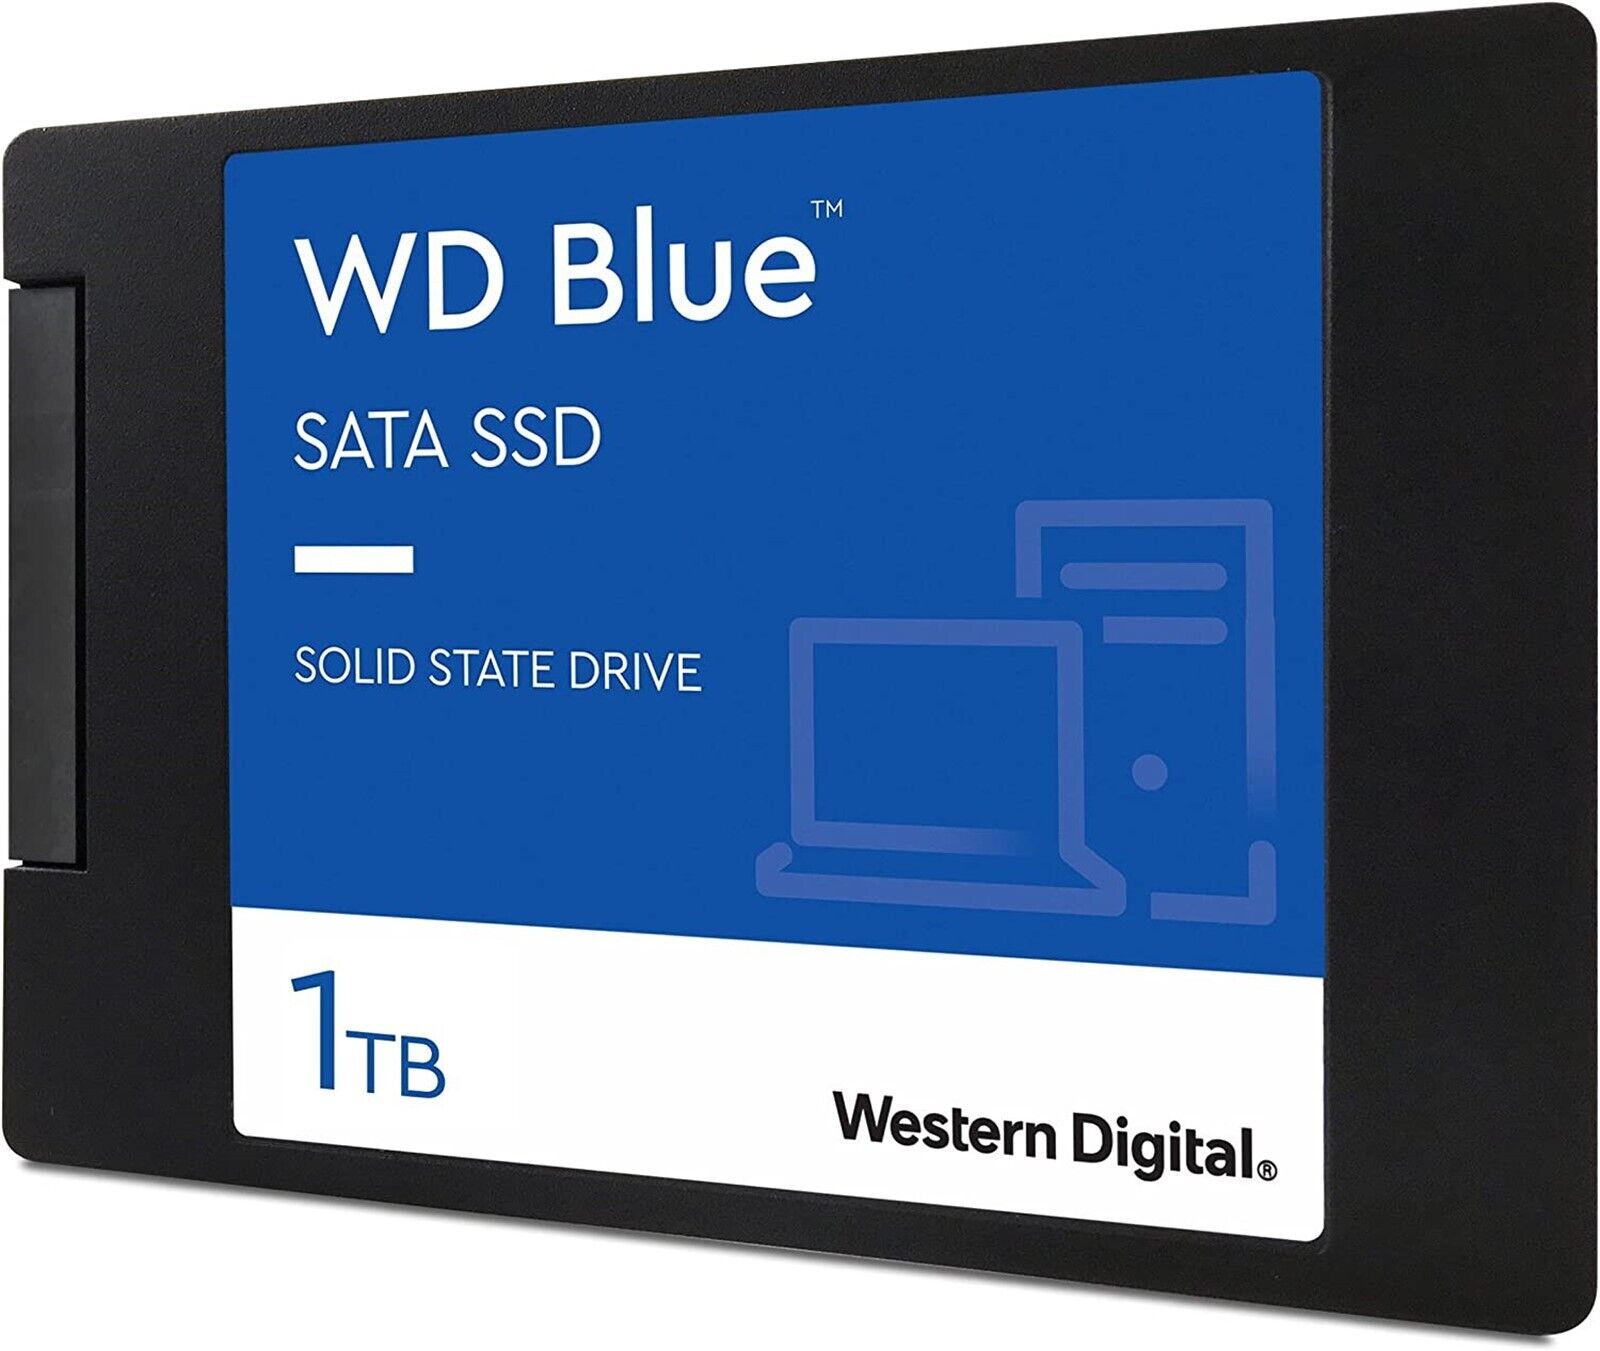 wd blue 1tb 2.5" ssd tech supply shed